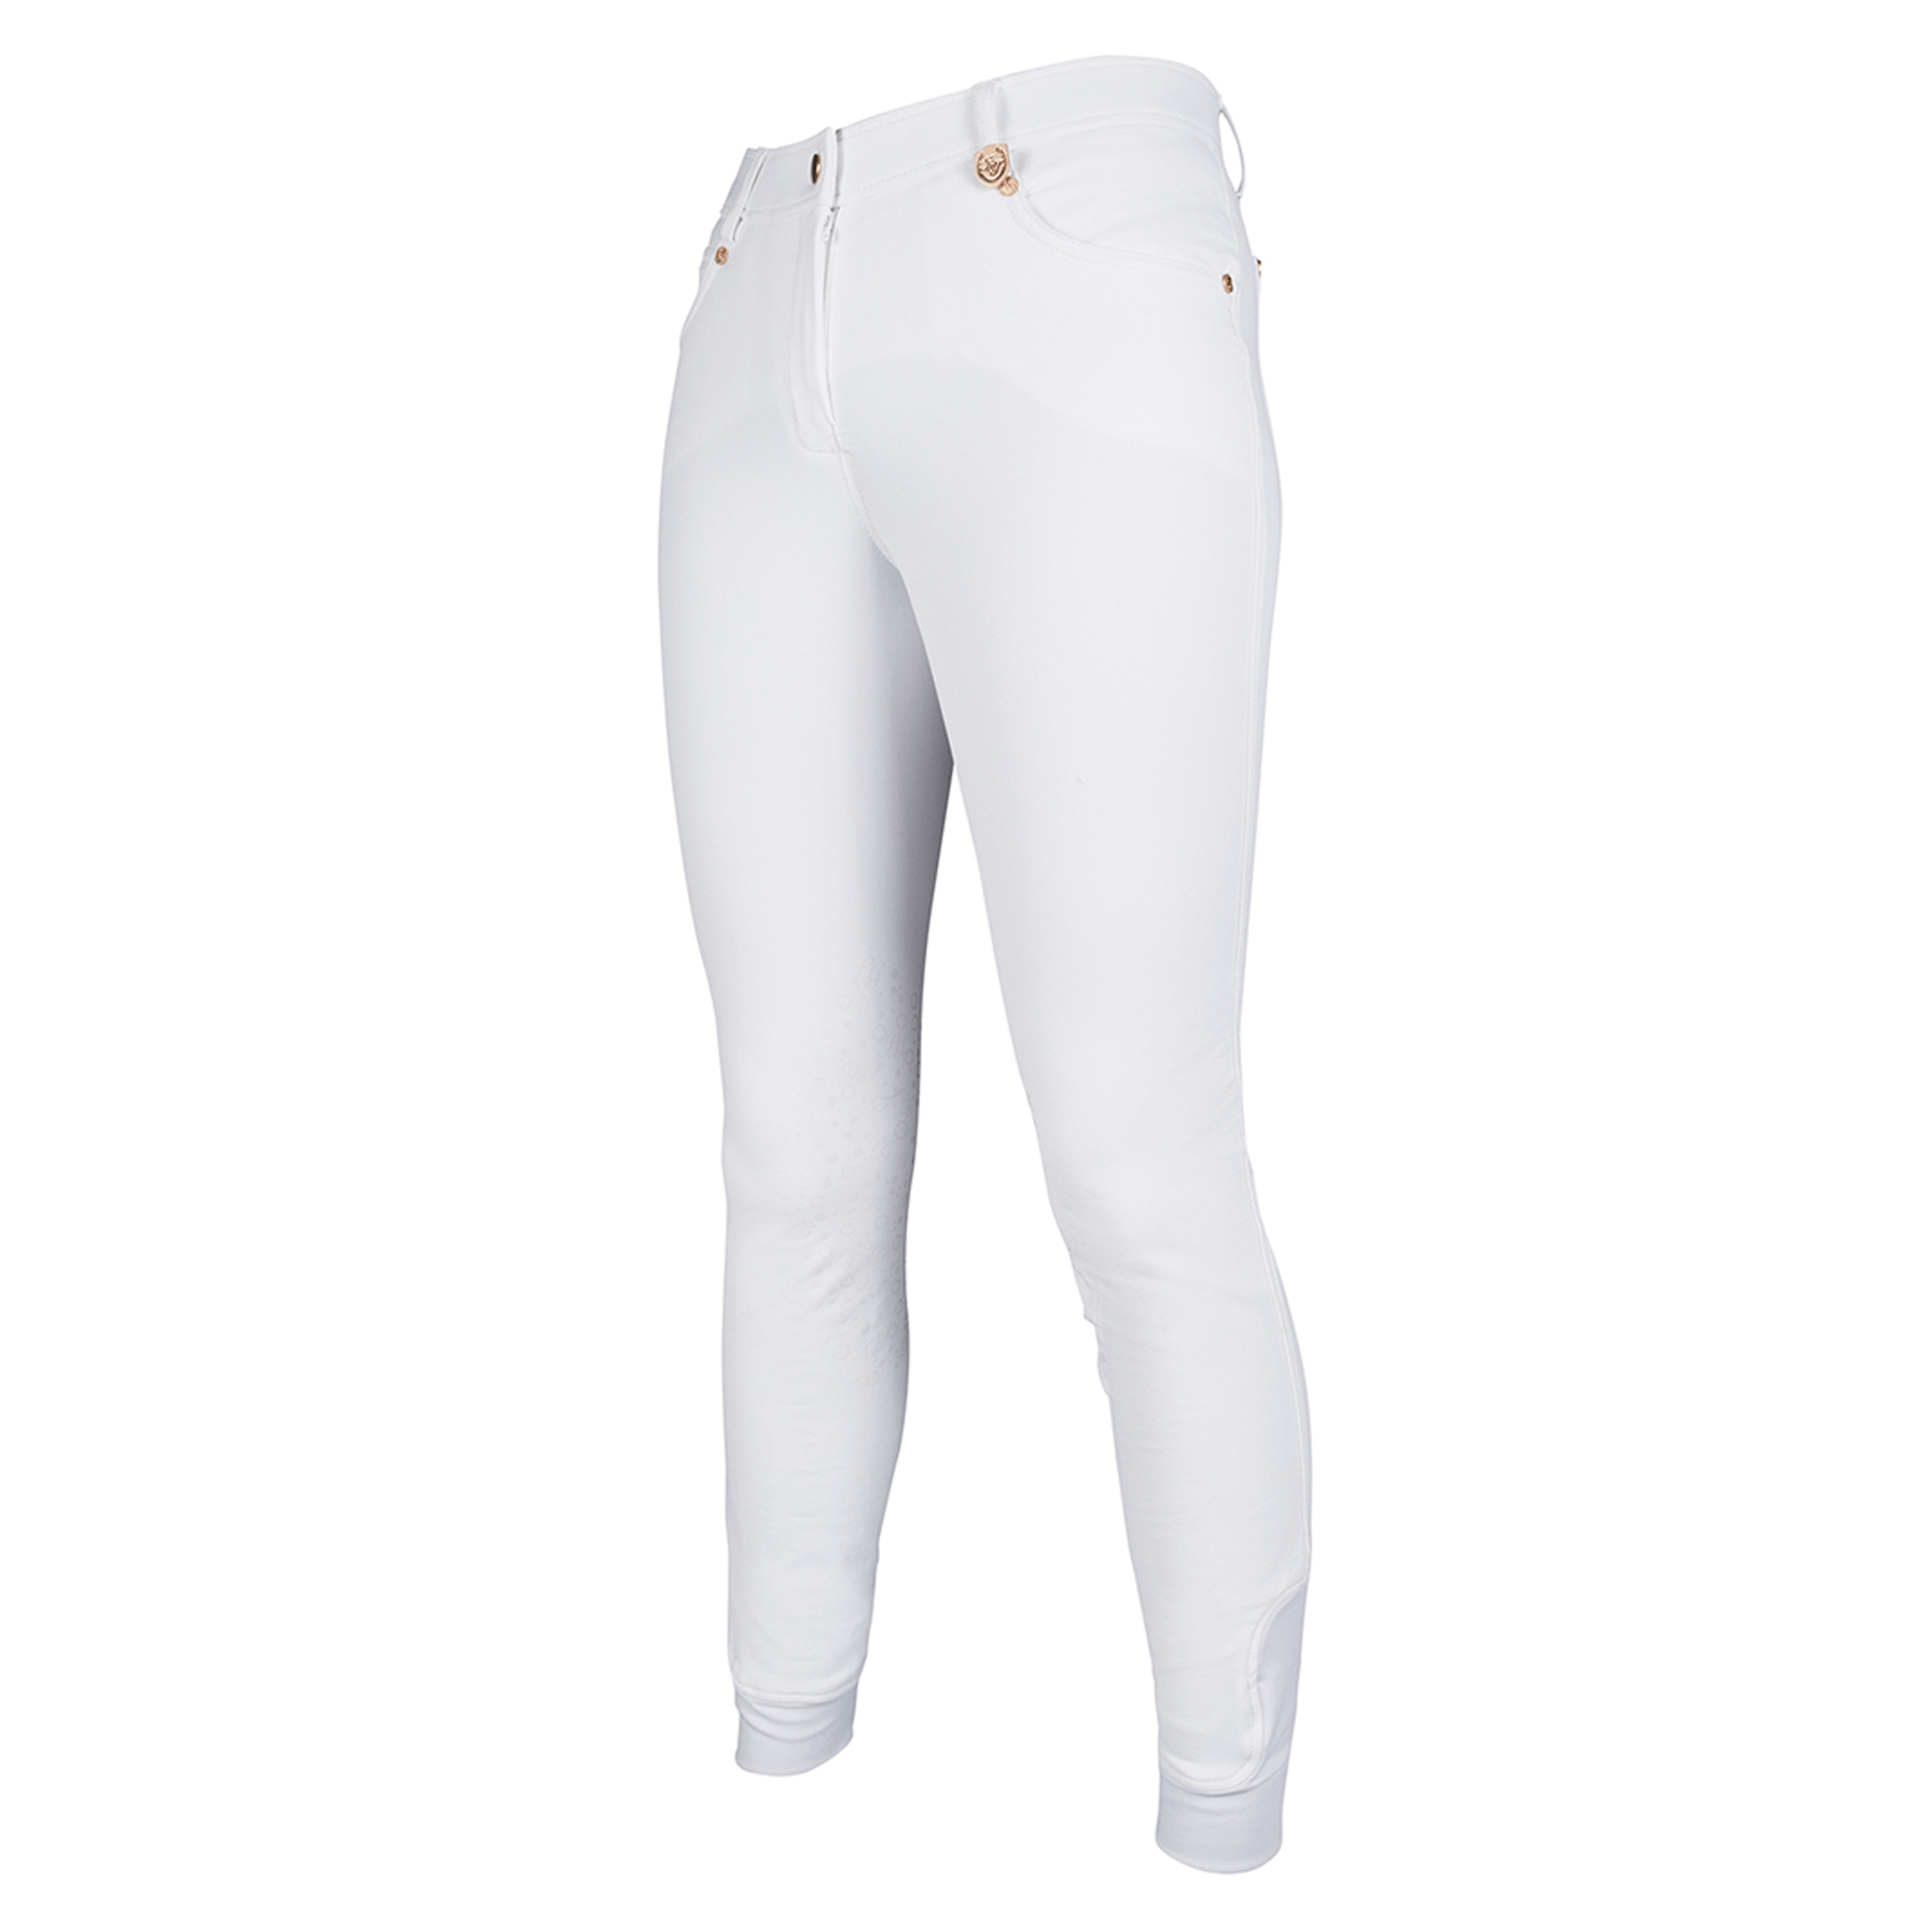 HKM Lauria Garrelli Competition Silicone Knee Patch Breeches 8926 White Front View